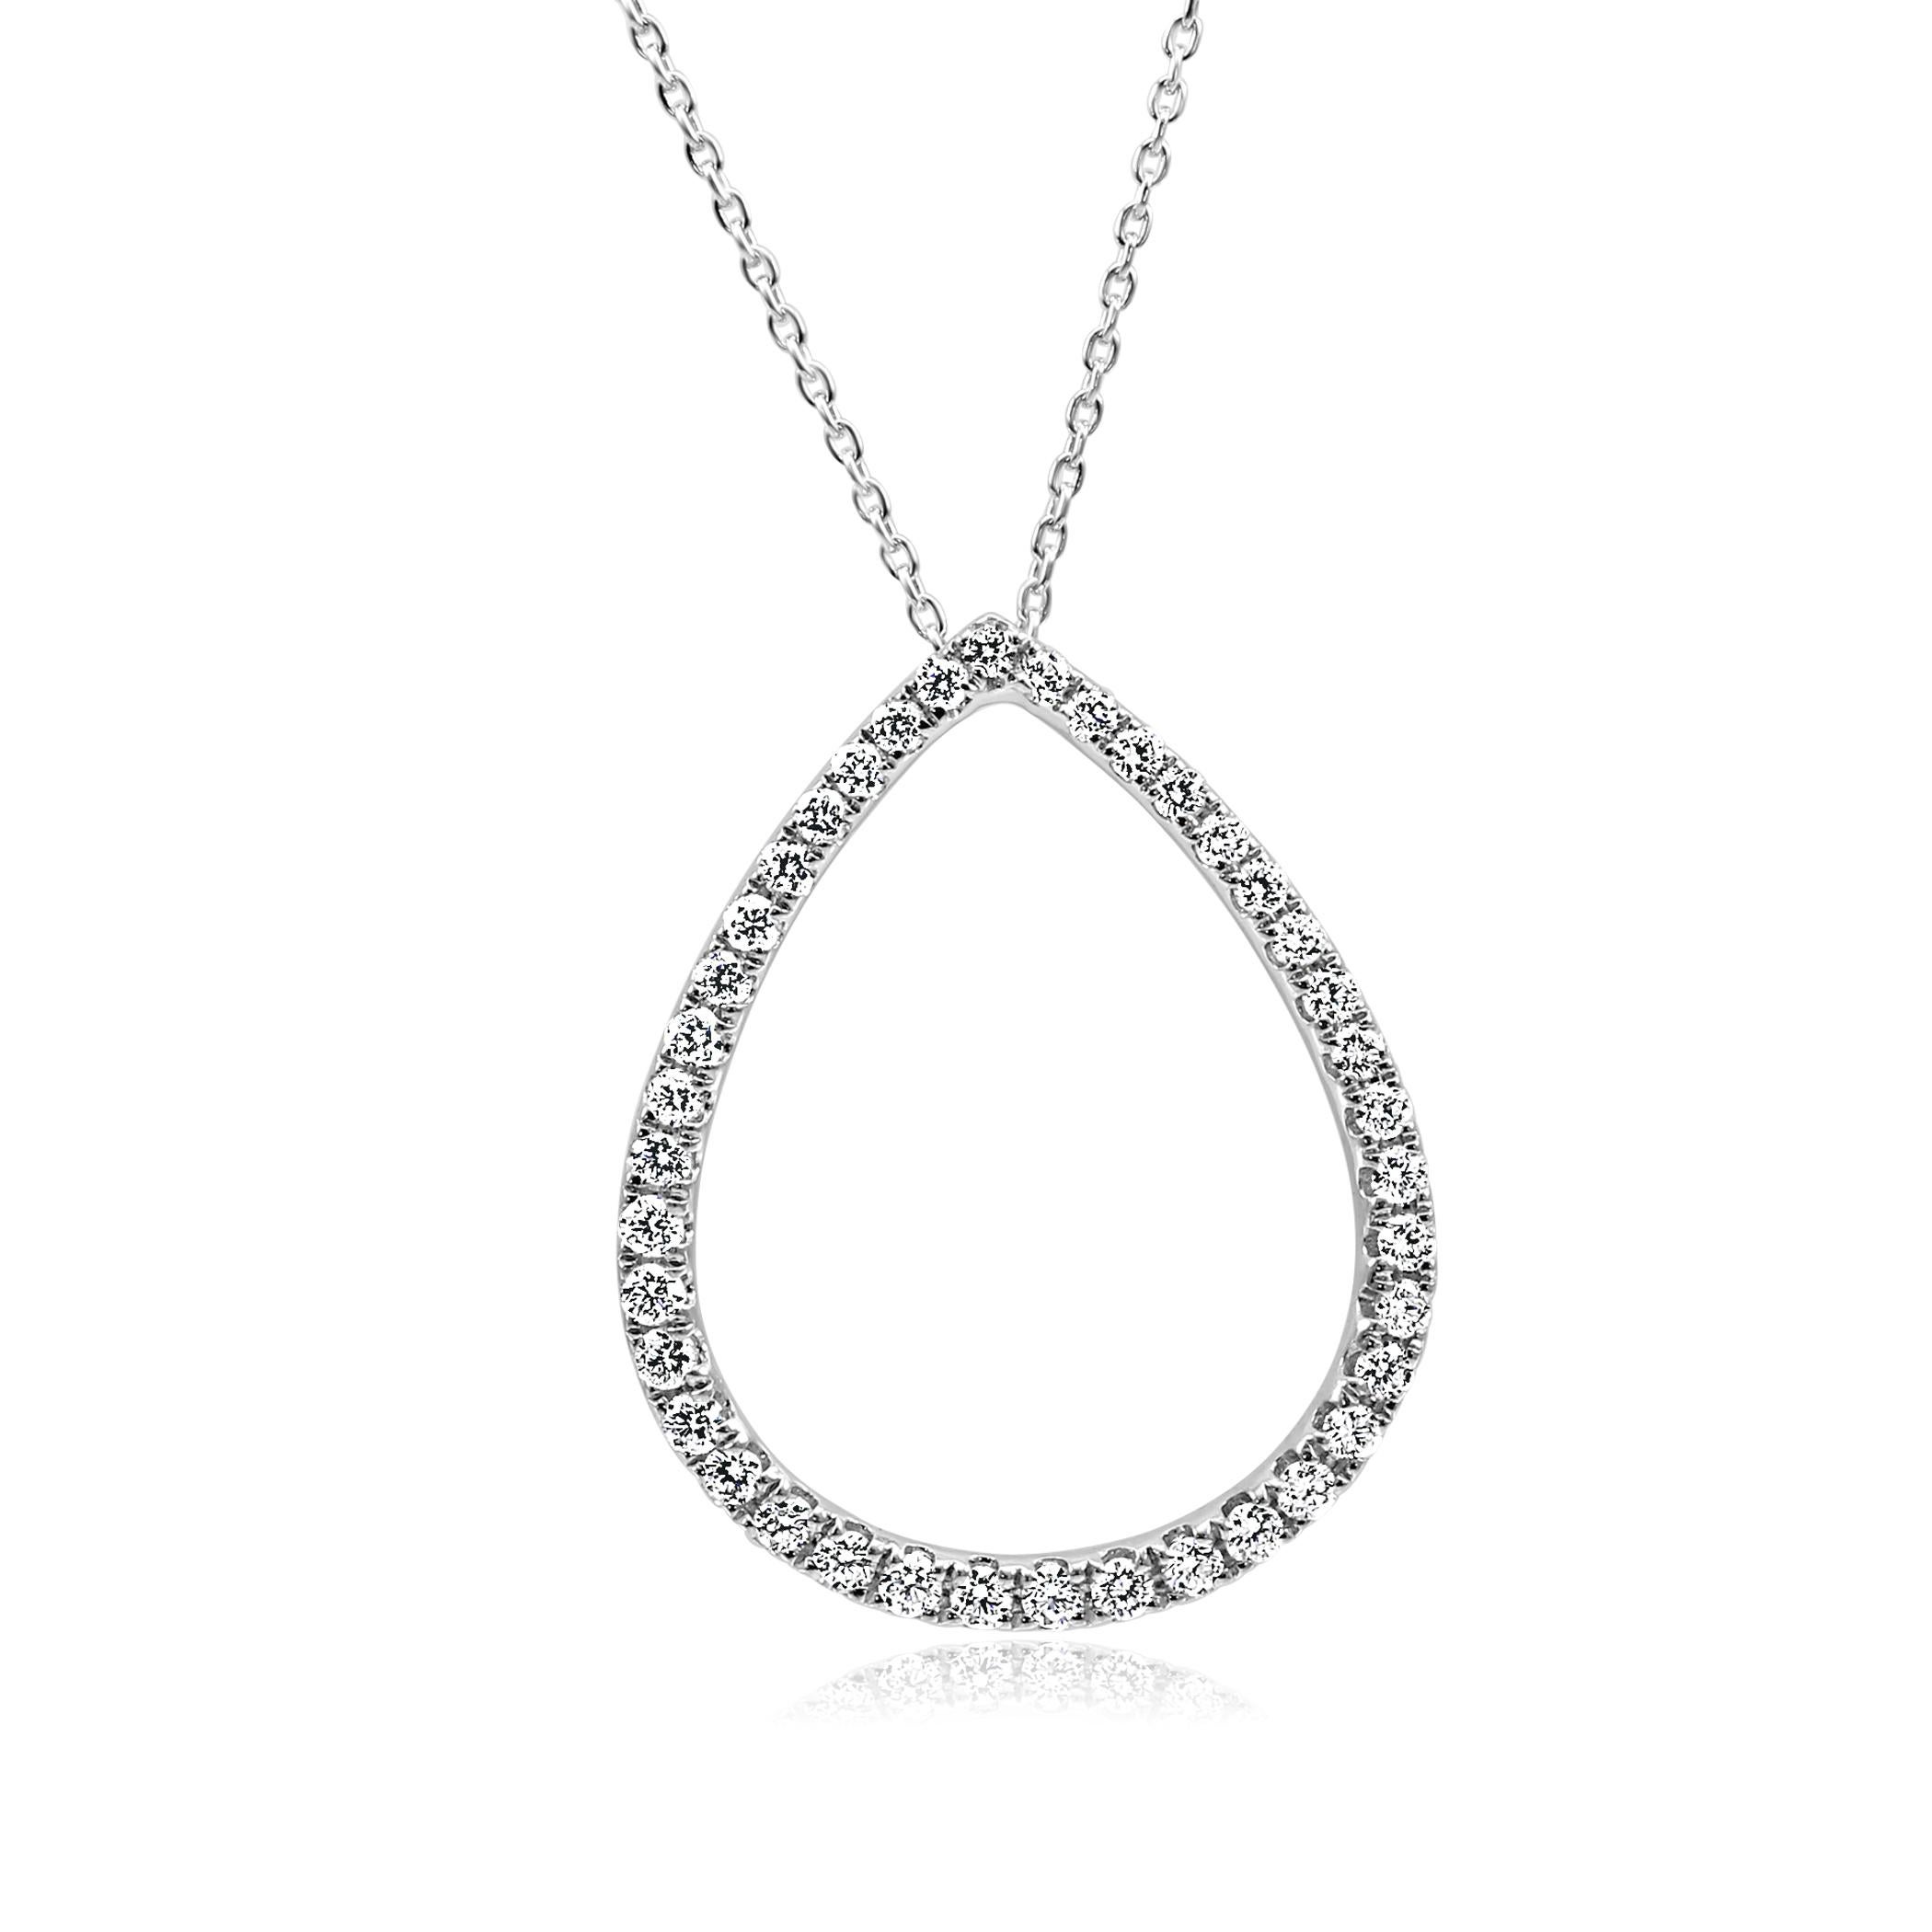 41 White G-H Color SI clarity Diamond Rounds 0.50 Carat set in Stunning 14K White Gold Fashion Drop Pendant Chain Necklace.

MADE IN USA  

Style available in different price ranges and with different center stones and gold colors, can be customized